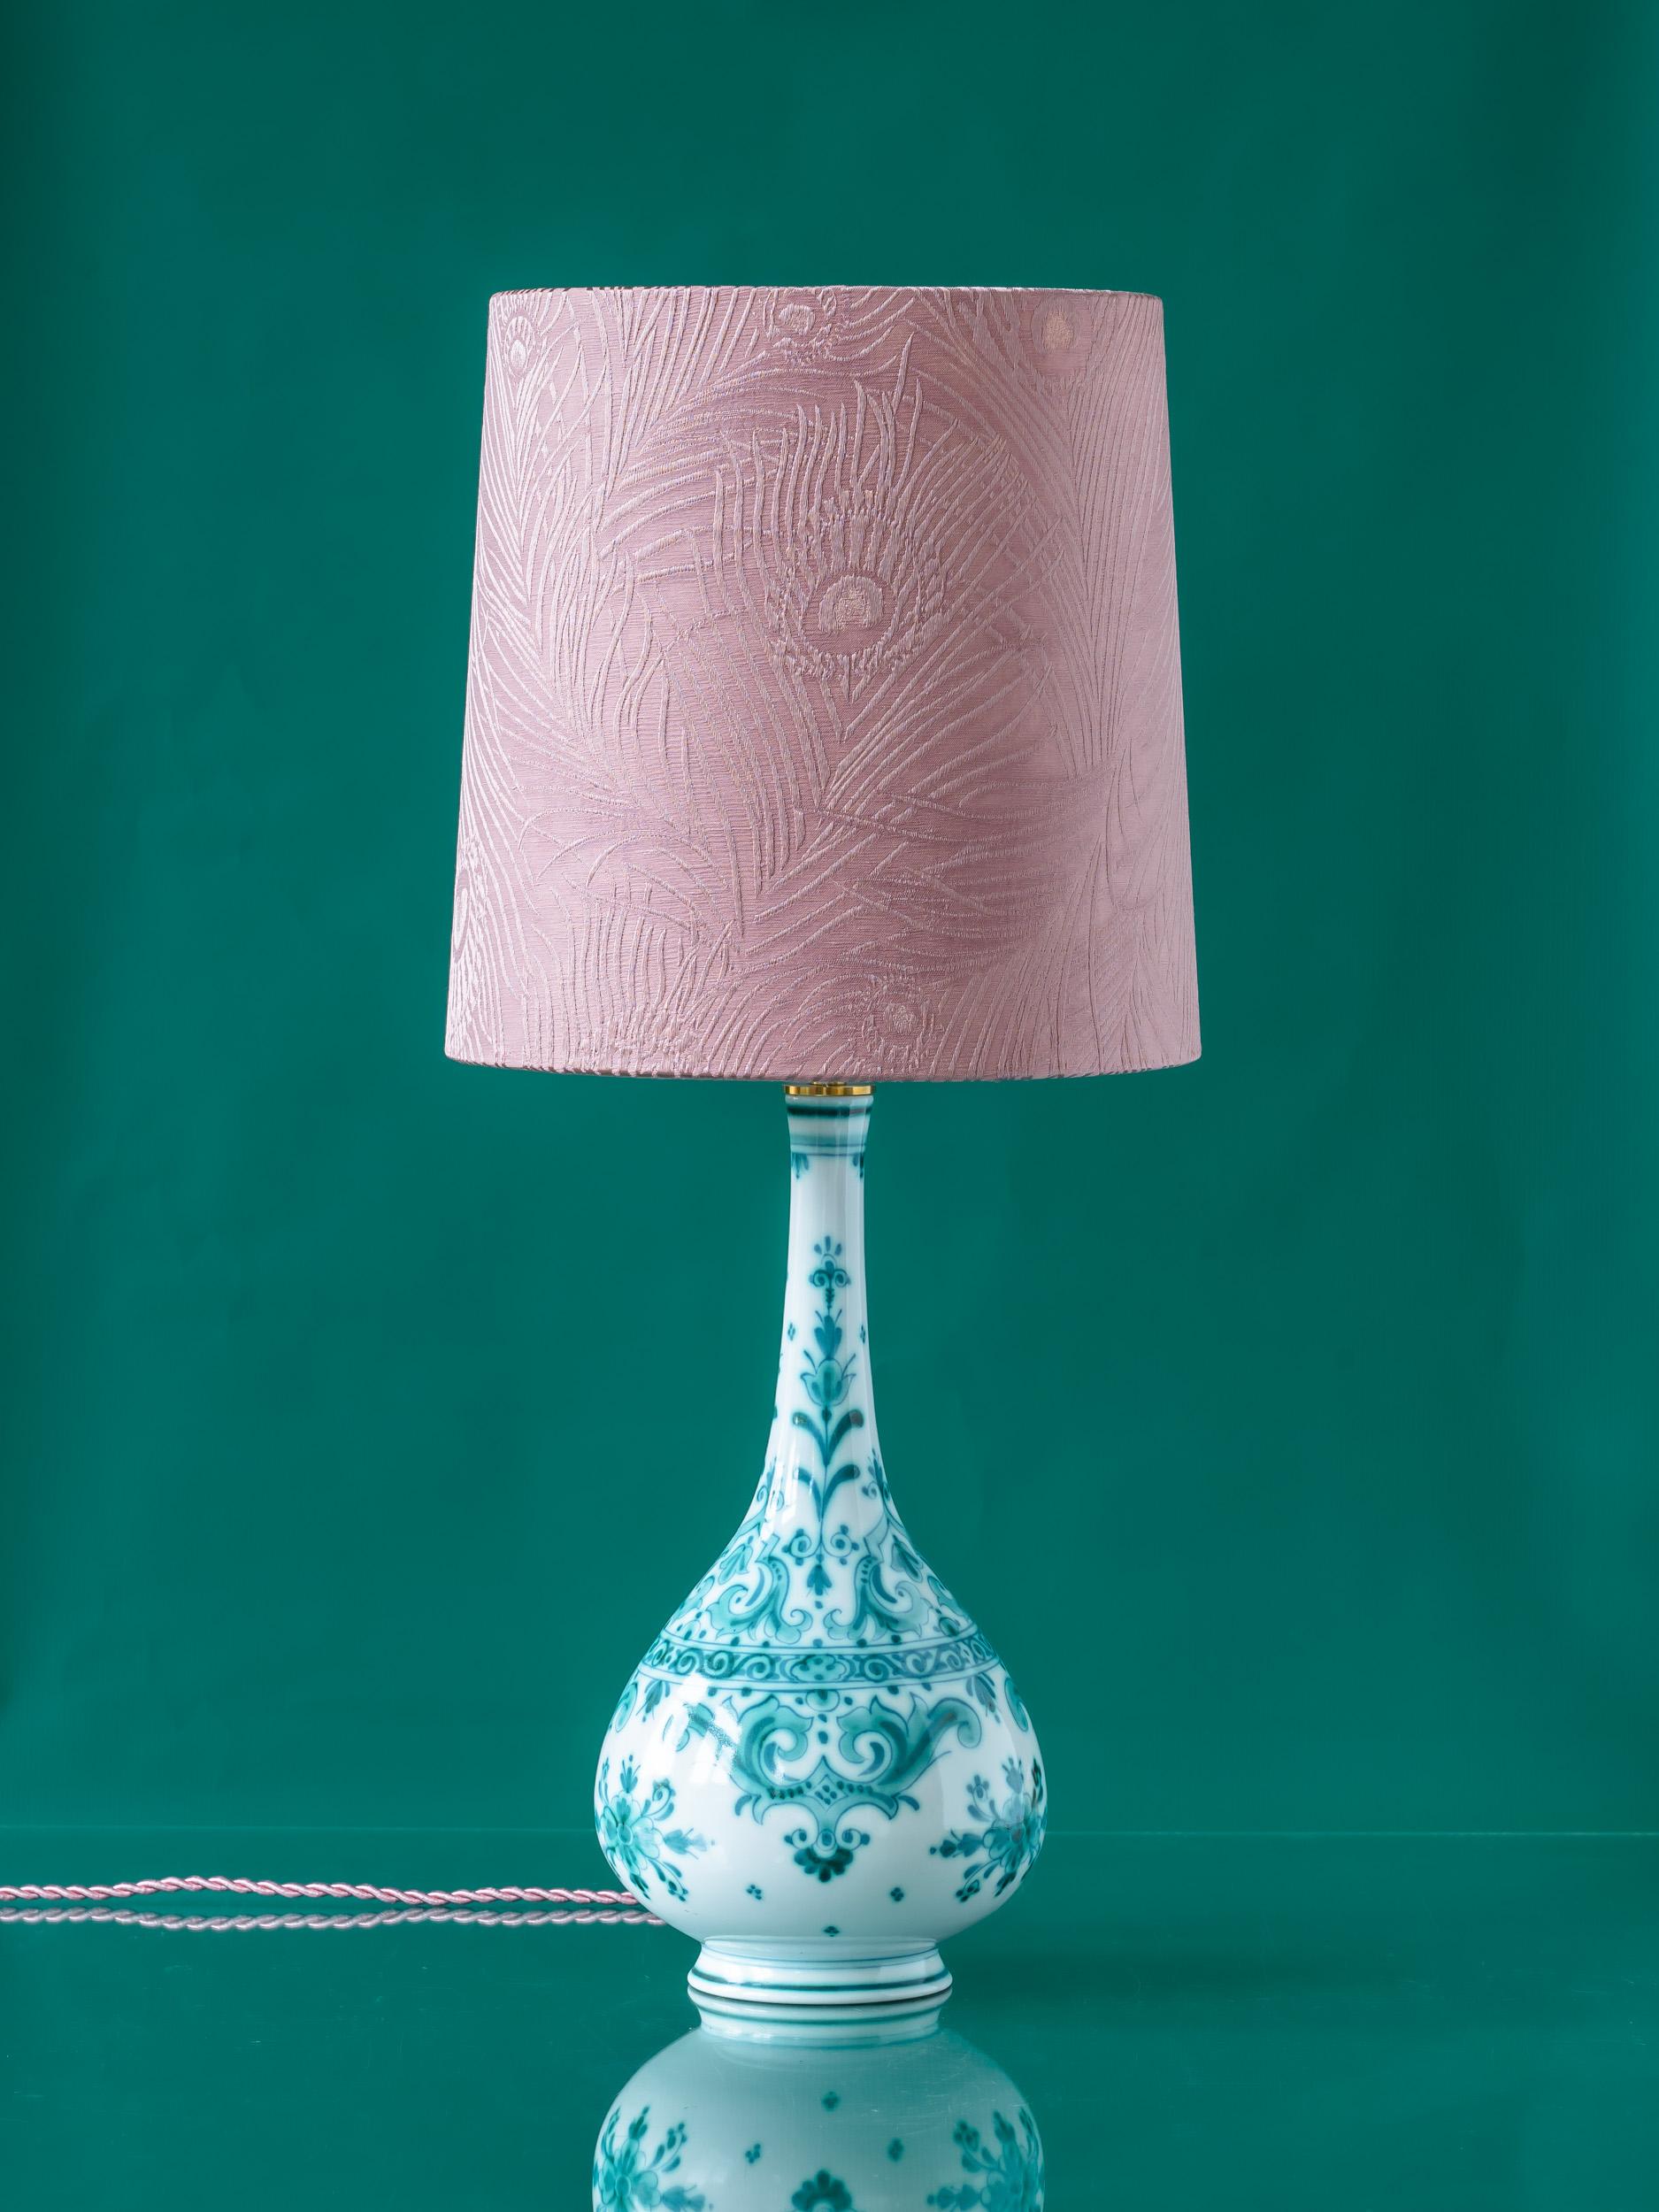 Introducing Athena, a one-of-a-kind lamp meticulously handcrafted from a vintage Royal Delft (De Porceleyne Fles) Delvert vase. The Delvert series, a fusion of the French term for green (vert) and the historic city of Delft, stands as a testament to